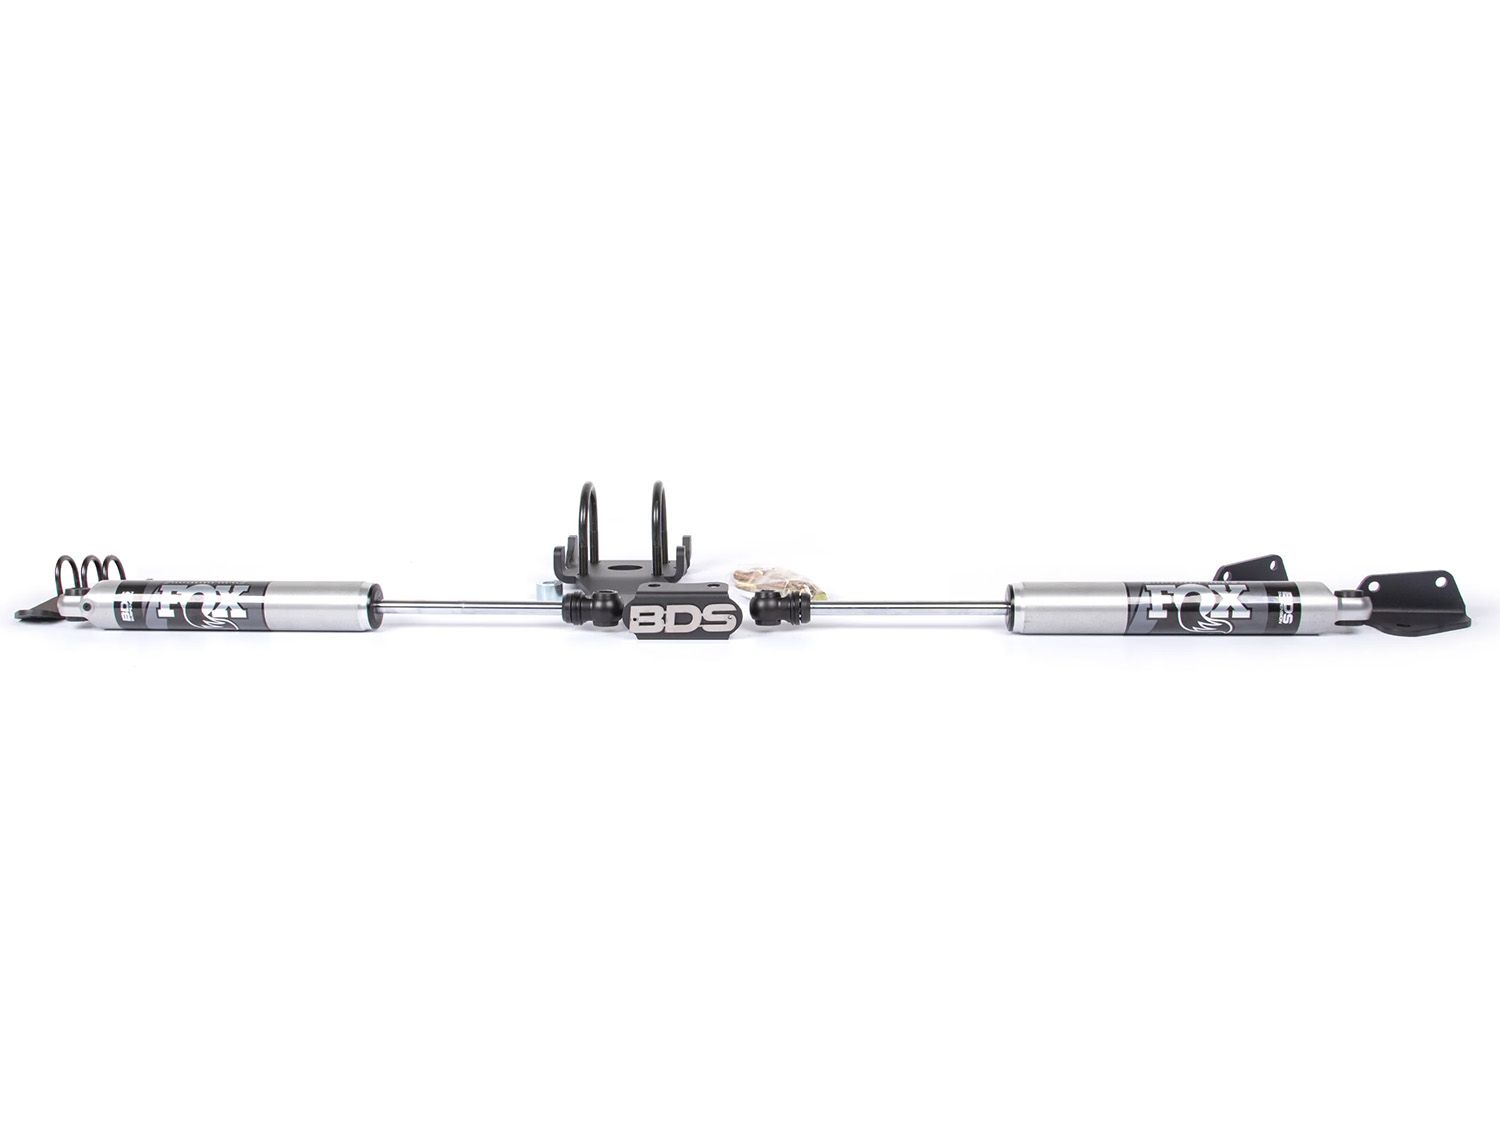 Ram 2500 2008-2013 Dodge 4WD - Fox Dual Steering Stabilizer by BDS